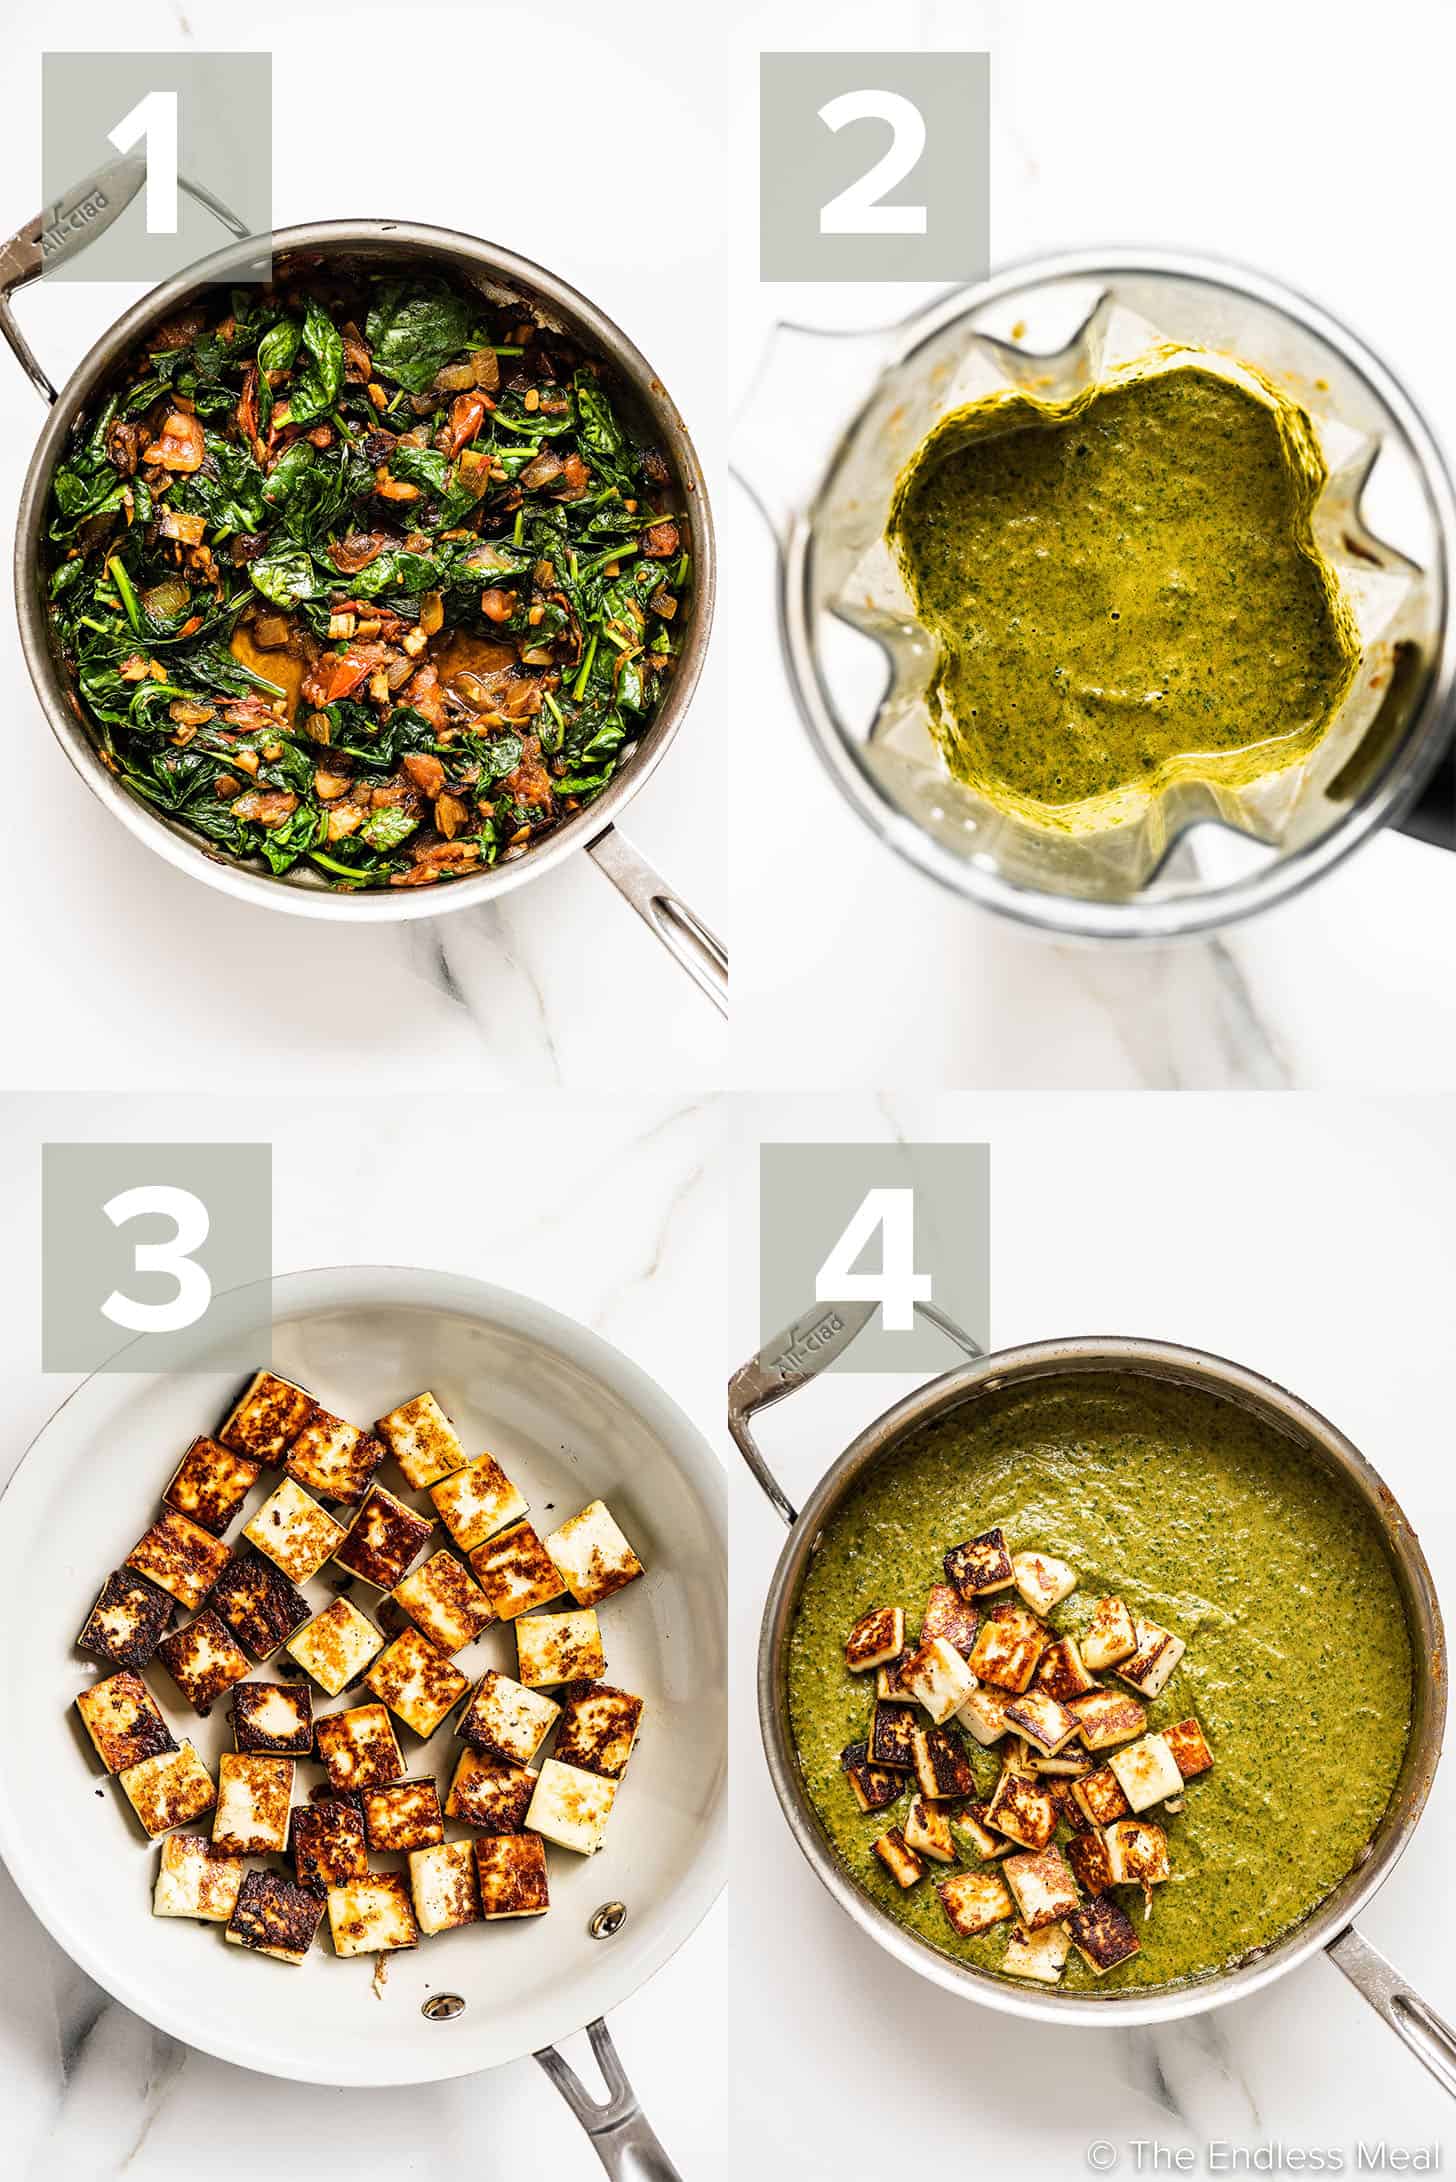 4 pictures showing how to make Palak Paneer